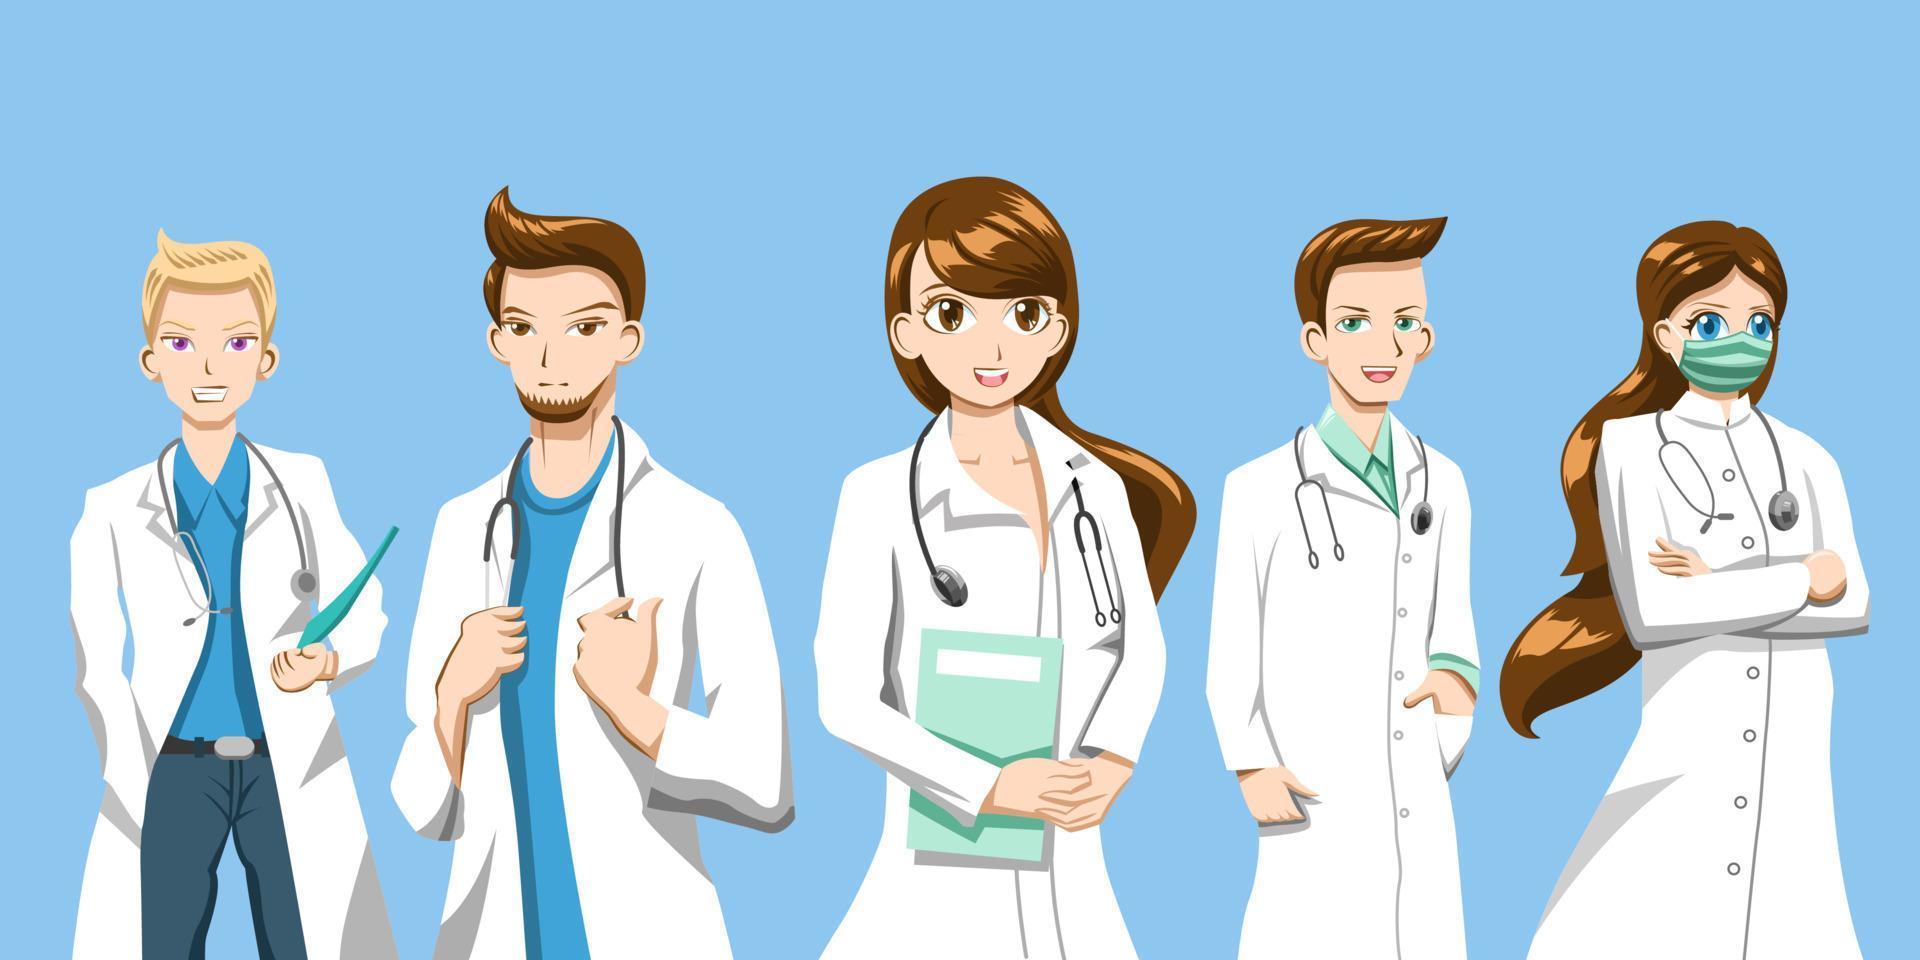 Doctor set collection vector graphic design